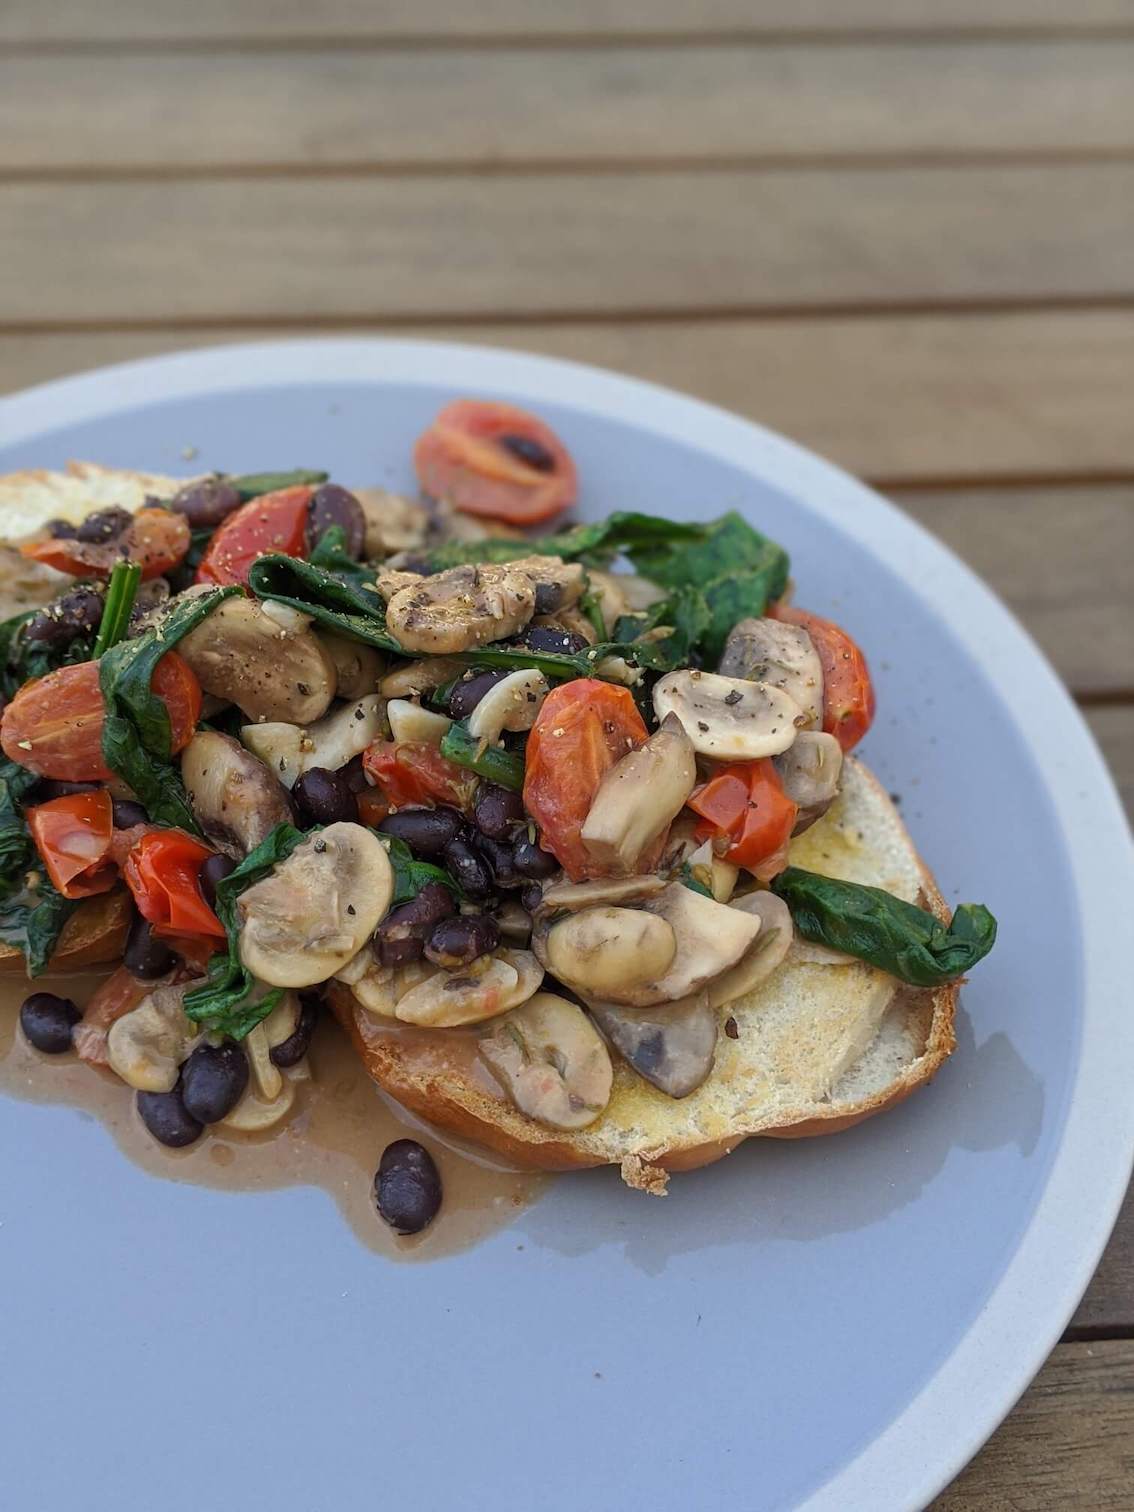 Miso, mushroom, coconut, spinach, tomatoes and black beans on a bagel